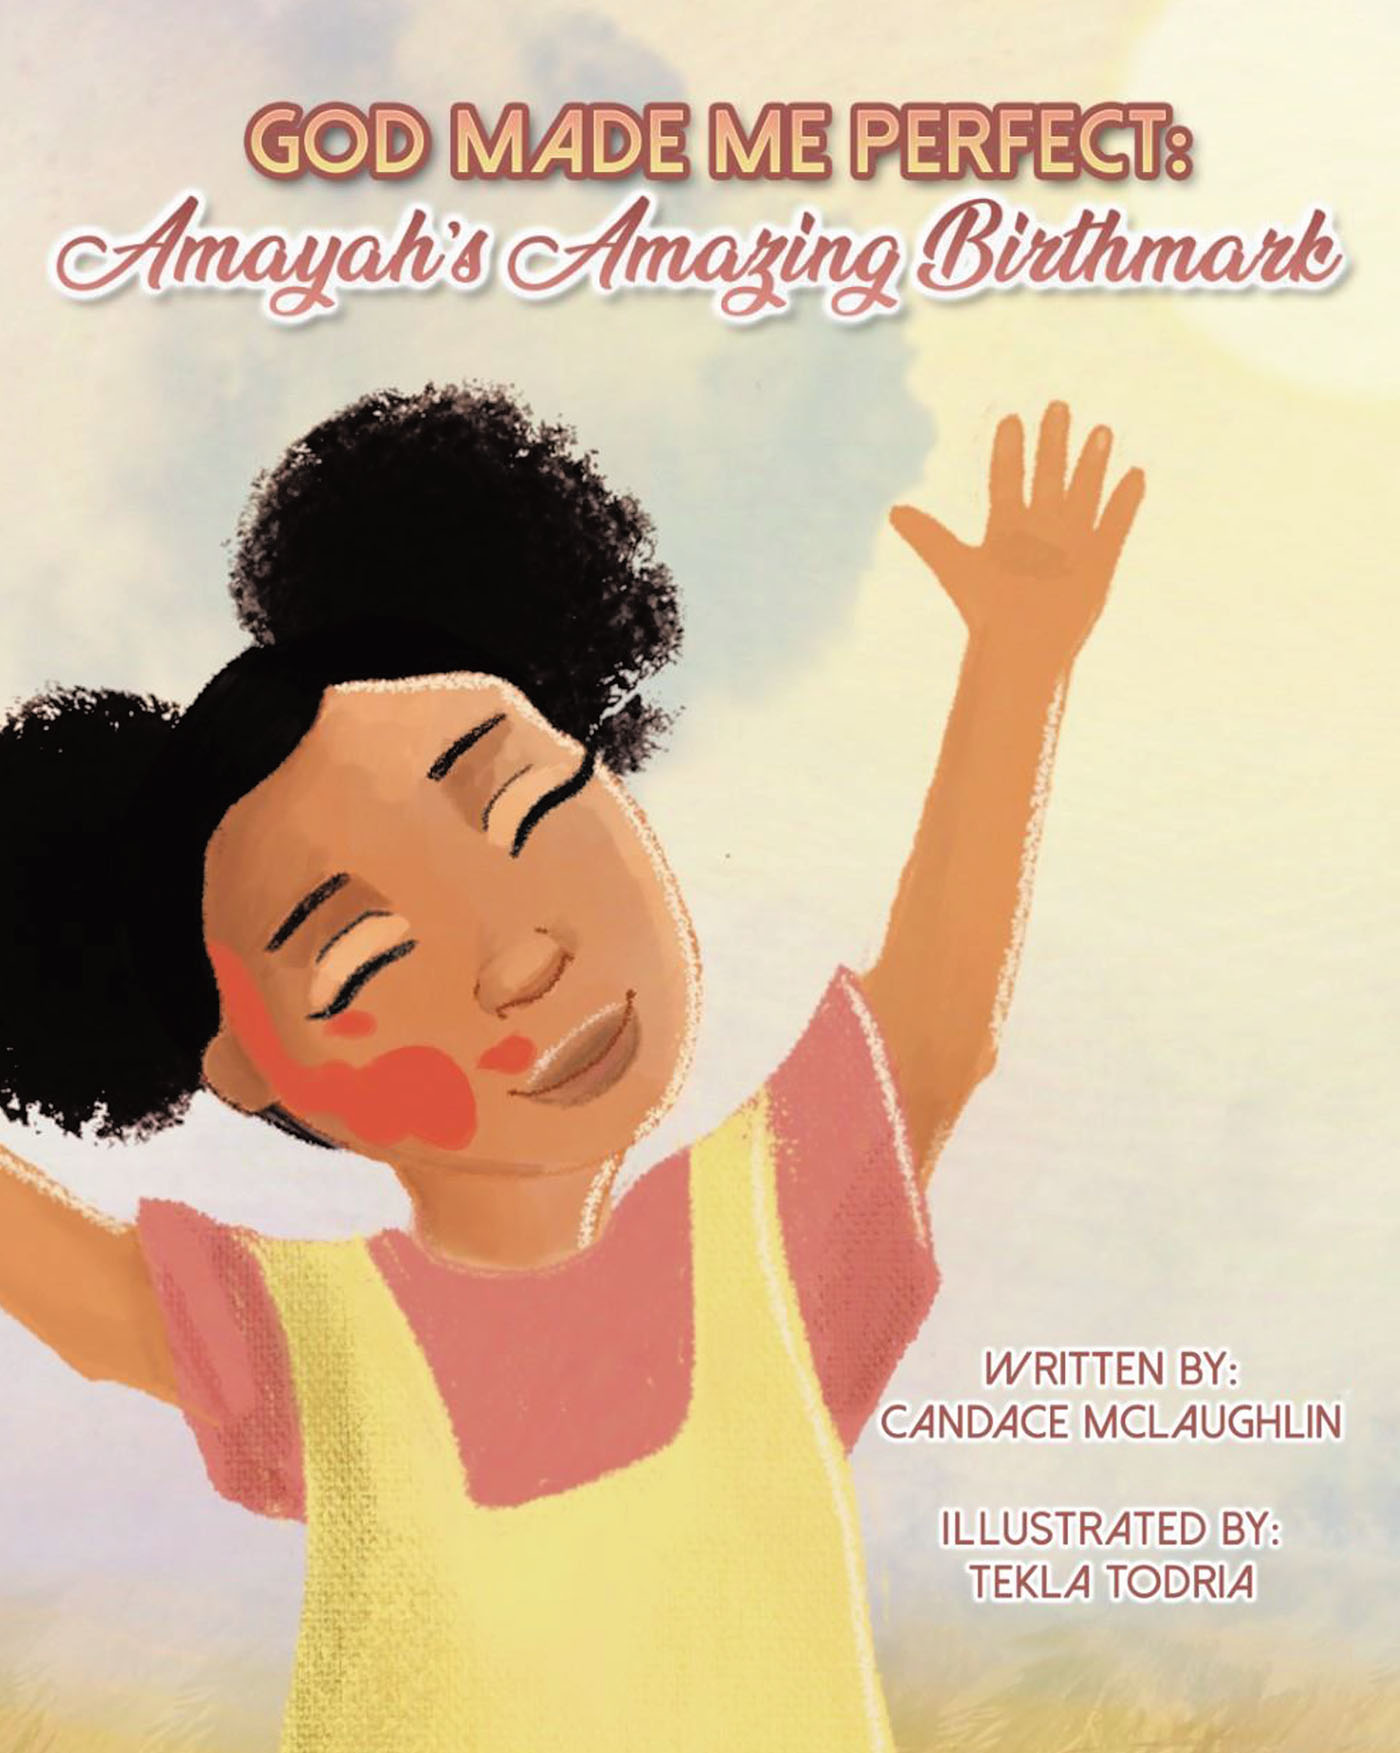 Candace McLaughlin’s Newly Released “God Made Me Perfect: Amayah’s Amazing Birthmark” is a Heartwarming Story of Learning to Love Oneself